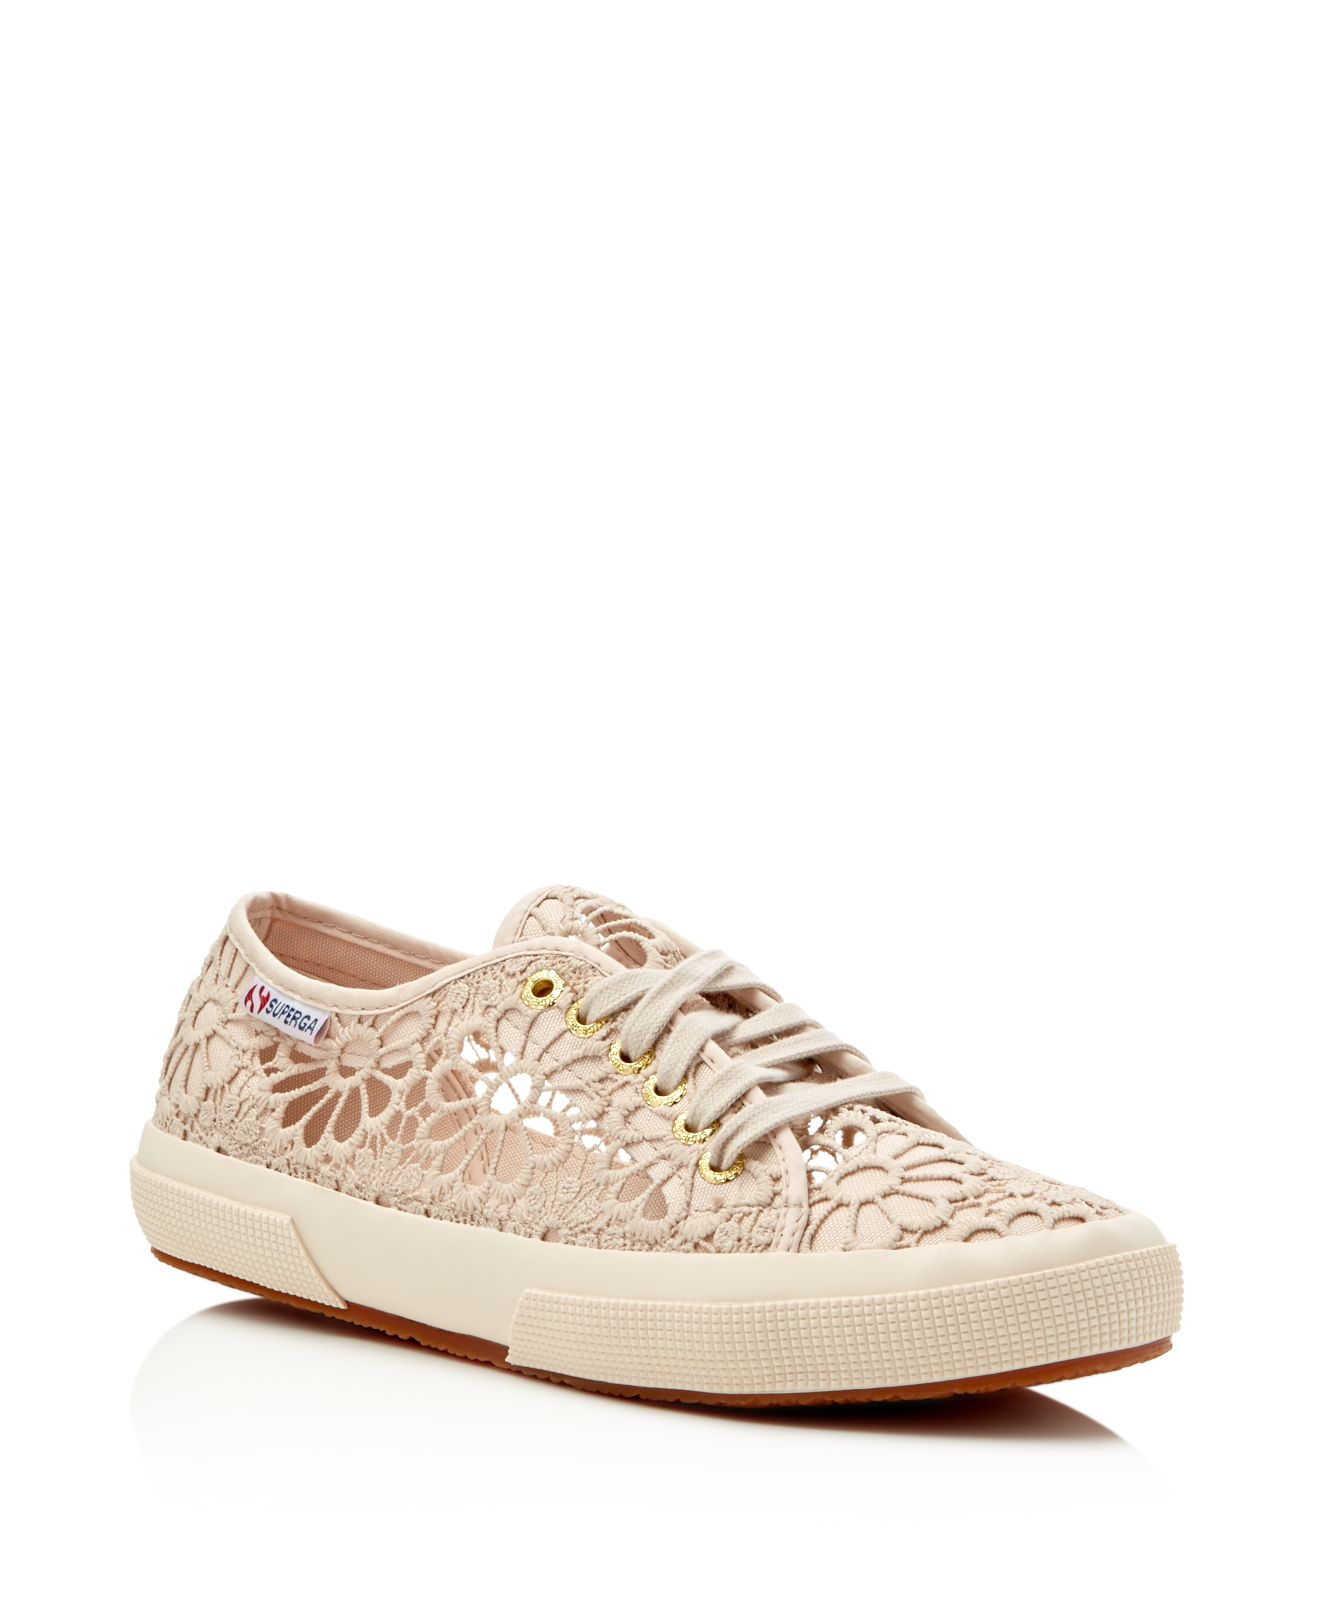 Superga Cotropew Crochet Lace Up Sneakers in Natural | Lyst